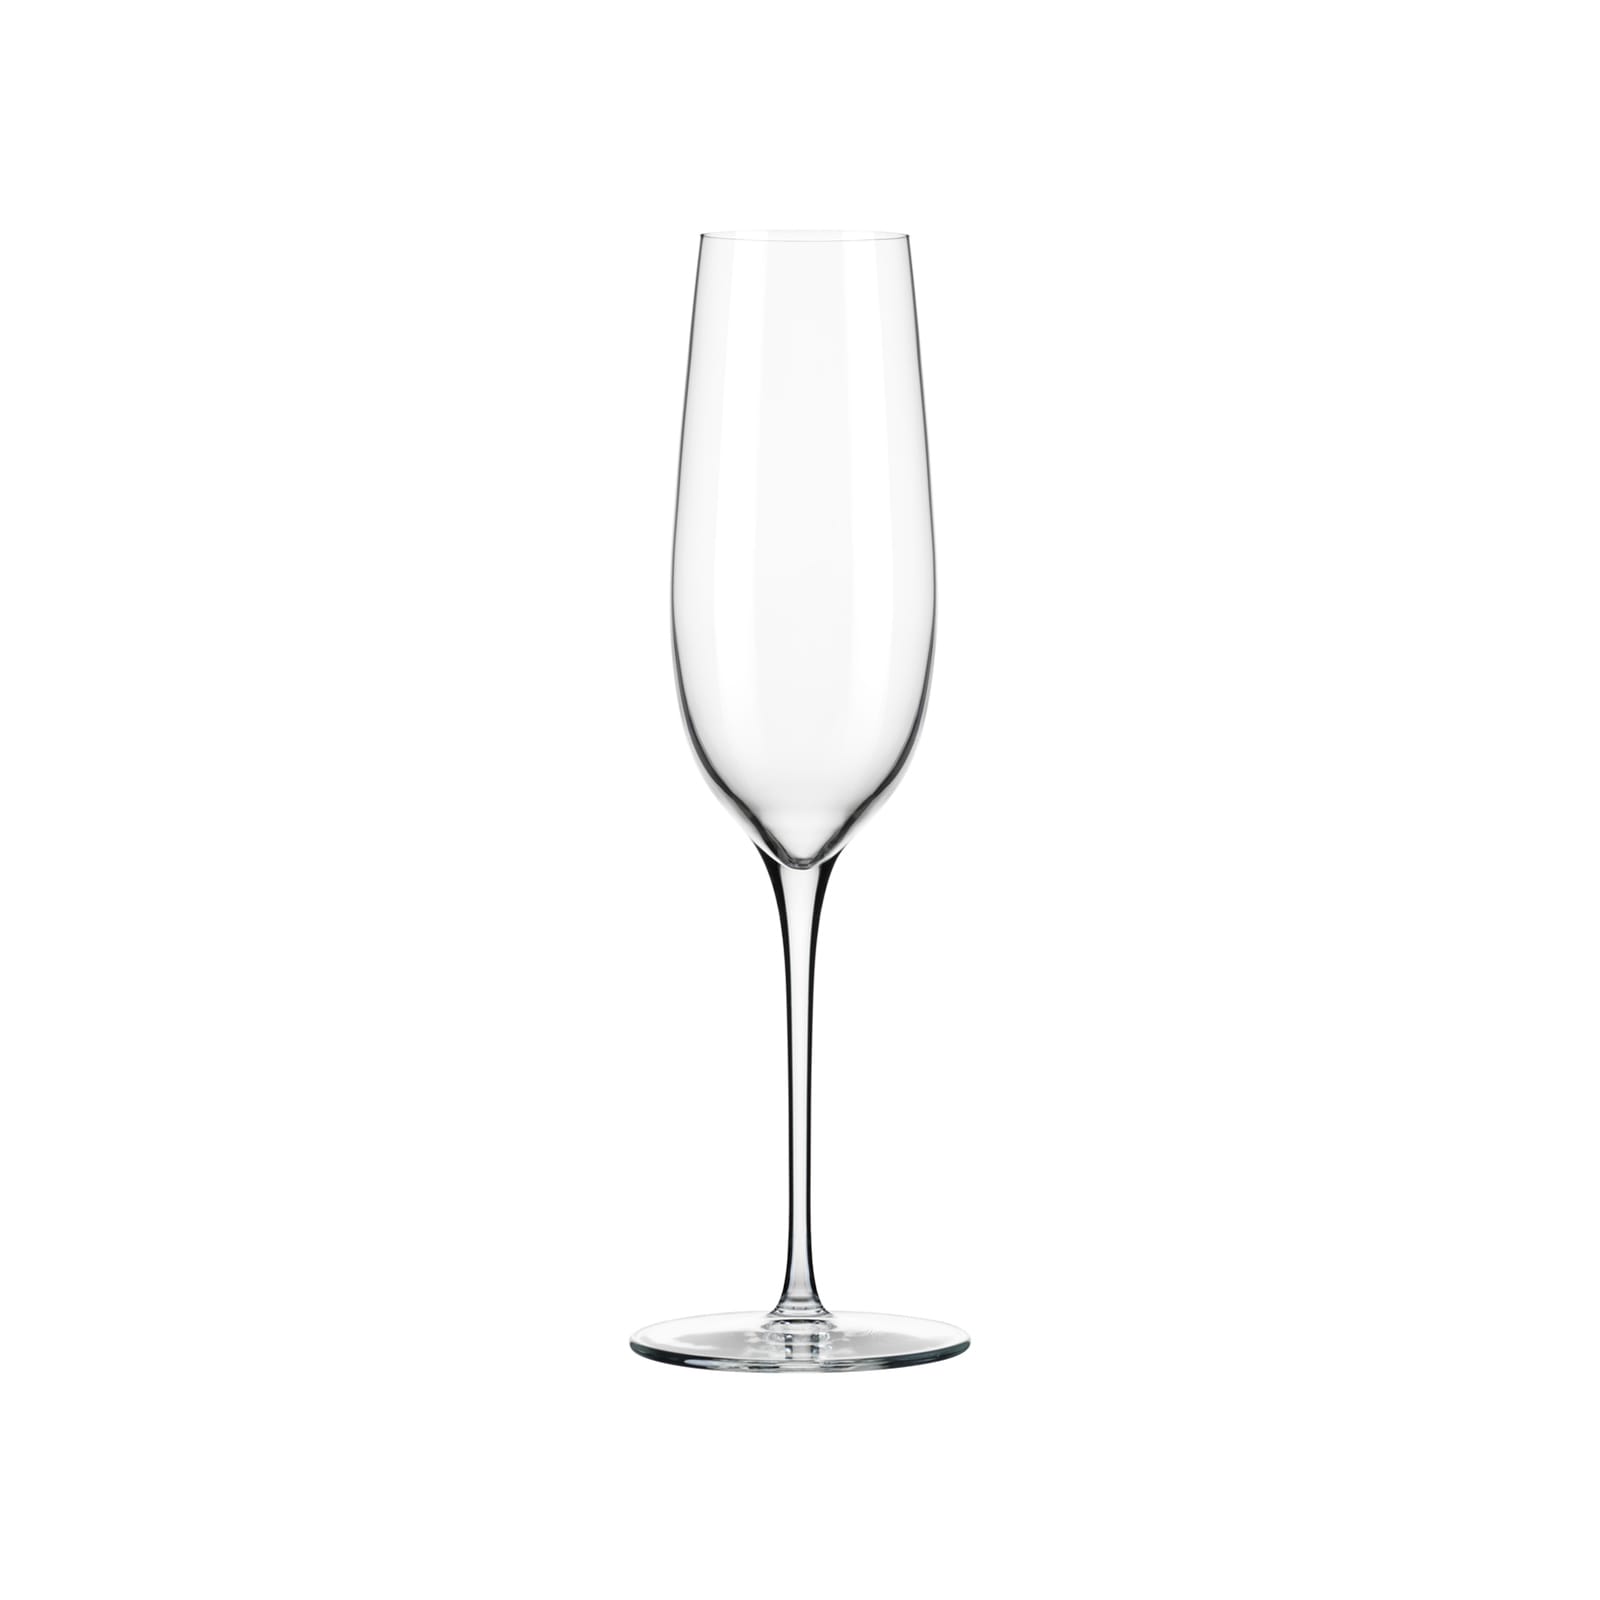 Iconic New York Champagne Flute – Museum of the City of New York